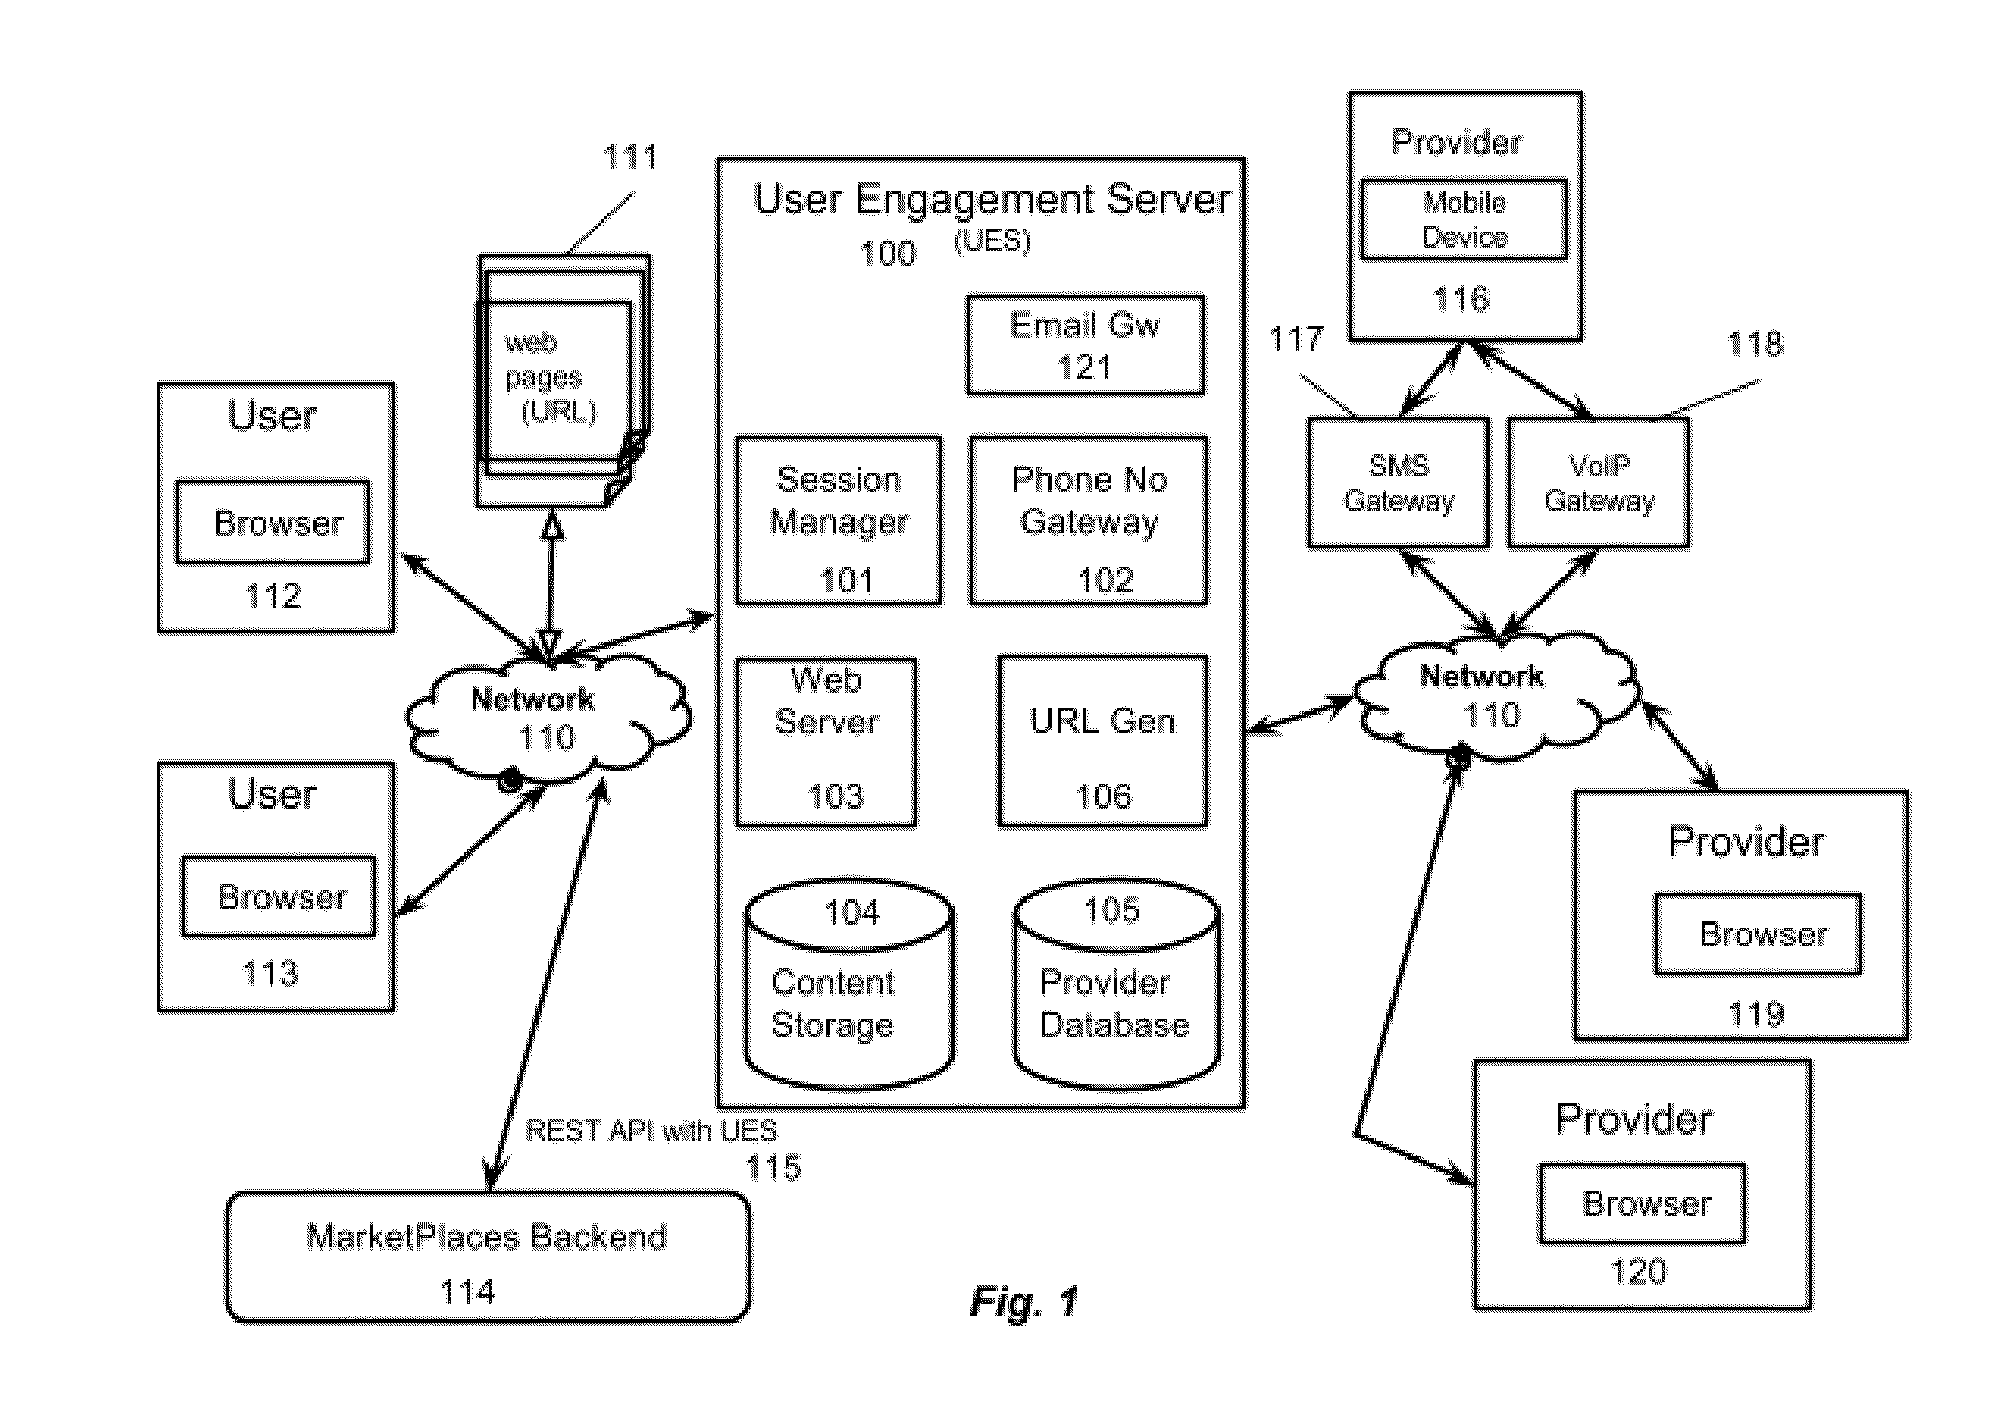 Instant generation and usage of HTTP URL based unique identity for engaging in multi-modal real-time interactions in online marketplaces, social networks and other relevant places